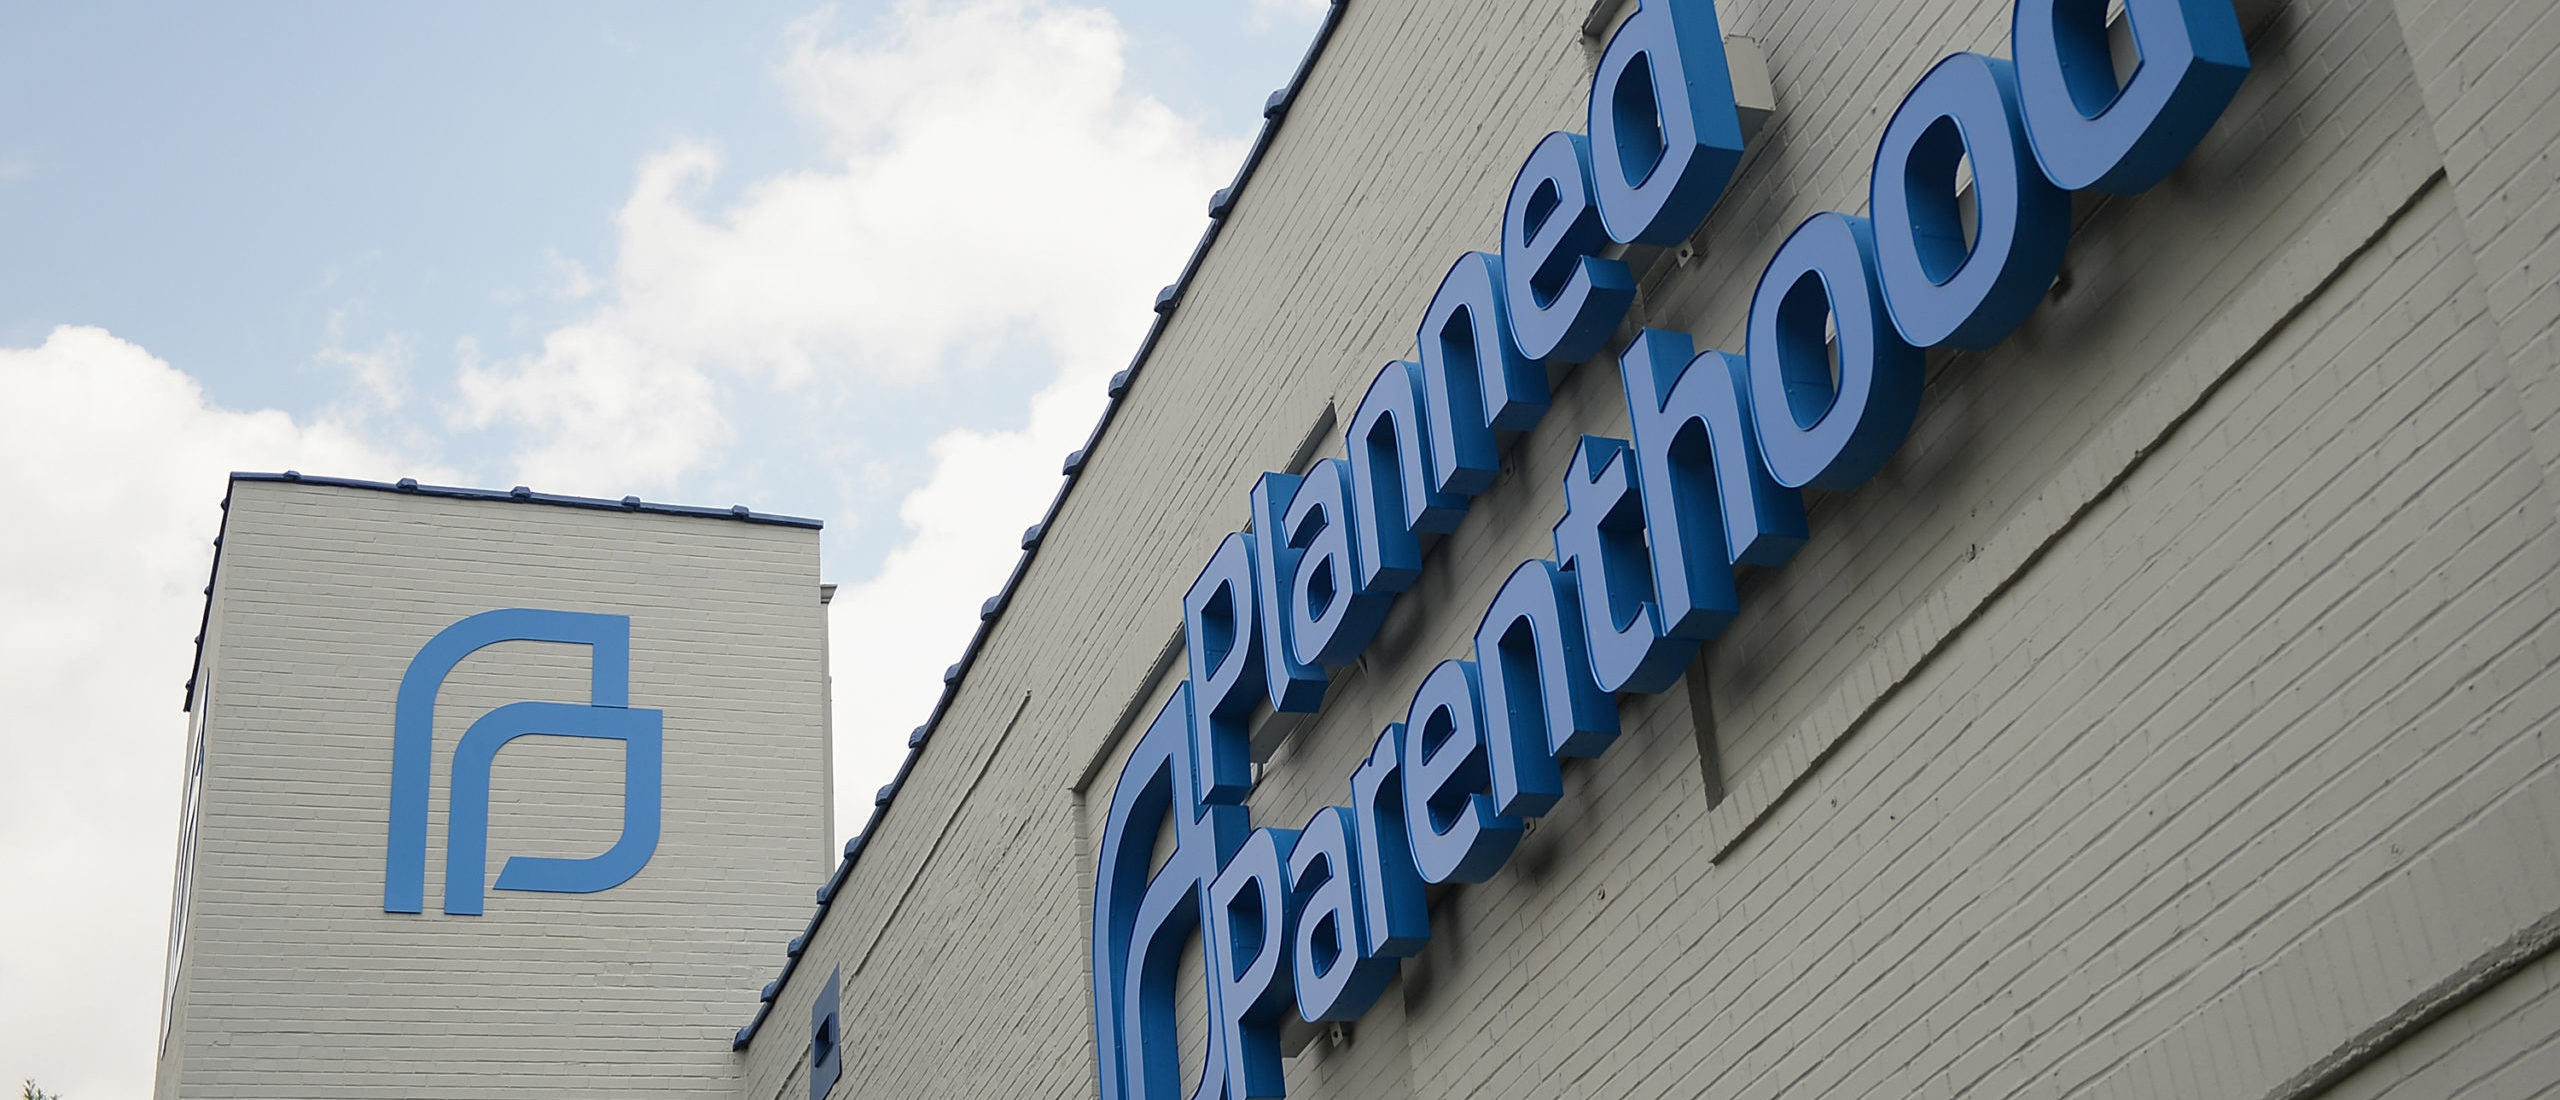 ST LOUIS, MO - MAY 28: The exterior of a Planned Parenthood Reproductive Health Services Center is seen on May 28, 2019 in St Louis, Missouri. In the wake of Missouri recent controversial abortion legislation, the states' last abortion clinic is being forced to close by the end of the week. (Photo by Michael B. Thomas/Getty Images)